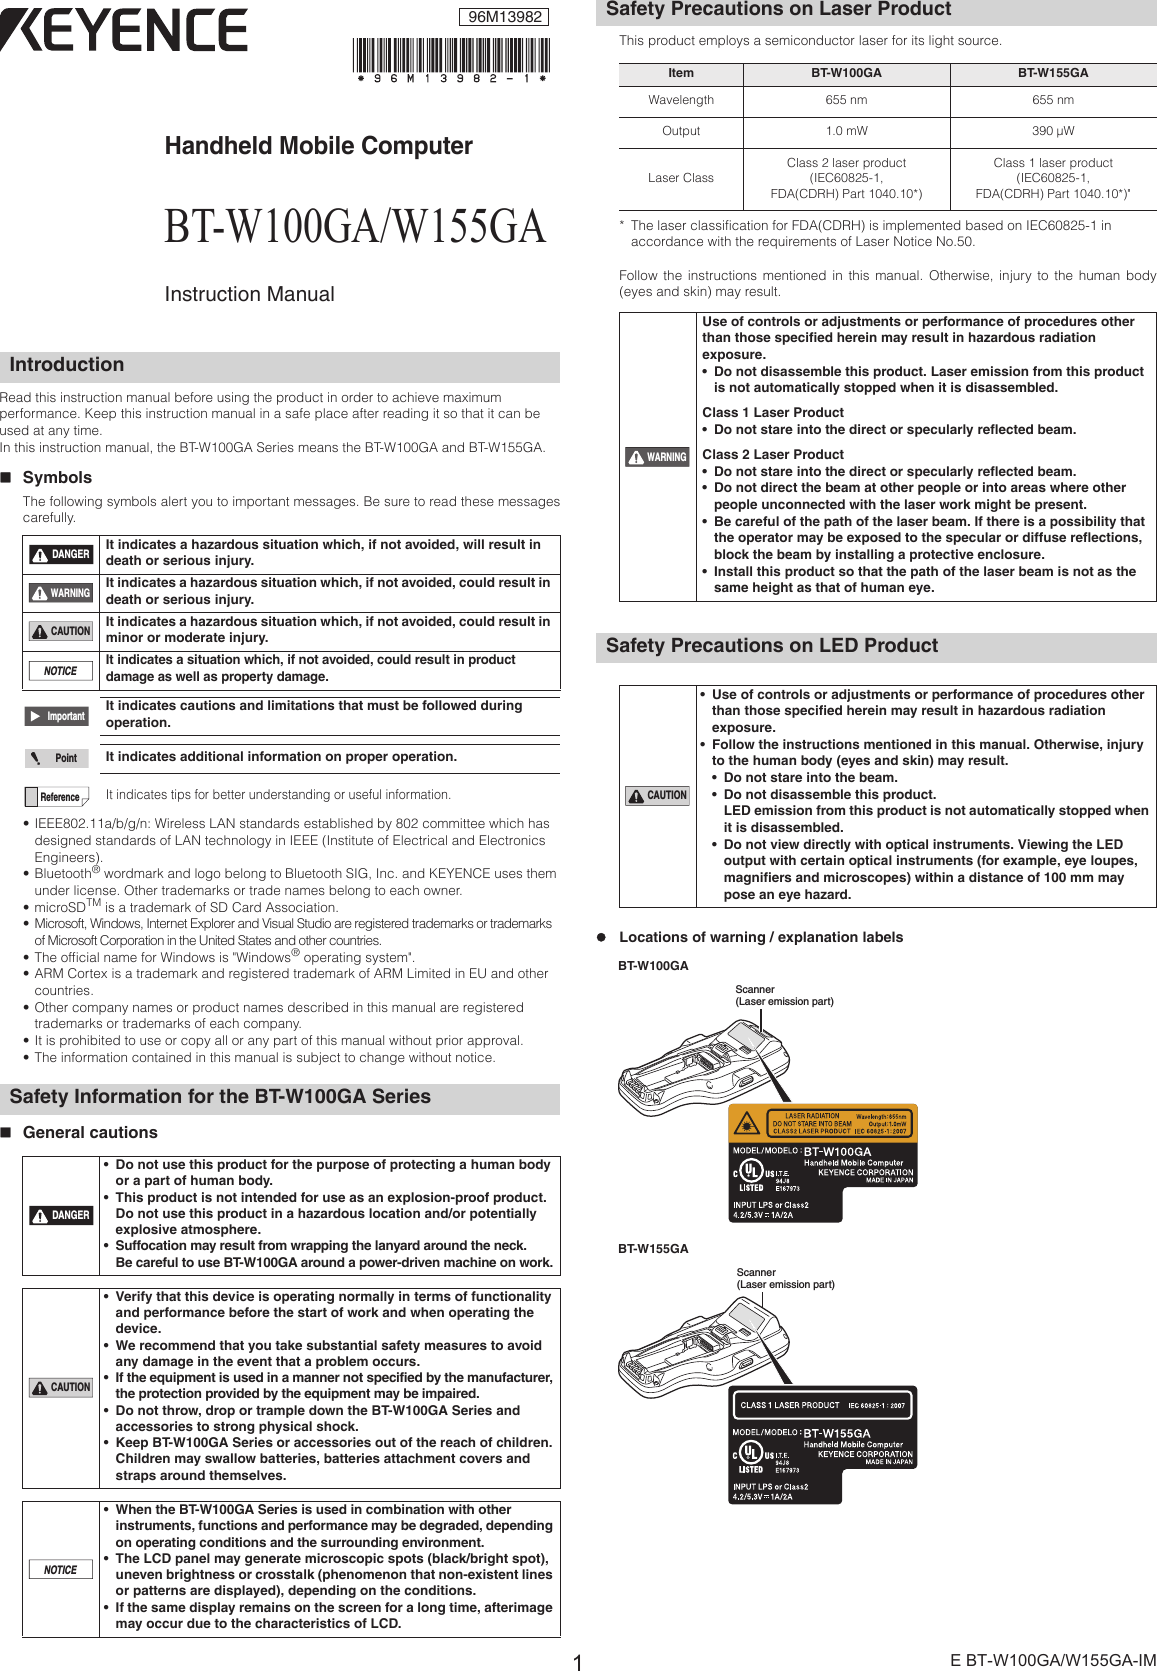 1E BT-W100GA/W155GA-IMHandheld Mobile ComputerBT-W100GA/W155GAInstruction ManualRead this instruction manual before using the product in order to achieve maximum performance. Keep this instruction manual in a safe place after reading it so that it can be used at any time.In this instruction manual, the BT-W100GA Series means the BT-W100GA and BT-W155GA.SymbolsThe following symbols alert you to important messages. Be sure to read these messagescarefully.• IEEE802.11a/b/g/n: Wireless LAN standards established by 802 committee which has designed standards of LAN technology in IEEE (Institute of Electrical and Electronics Engineers).• Bluetooth® wordmark and logo belong to Bluetooth SIG, Inc. and KEYENCE uses them under license. Other trademarks or trade names belong to each owner.•microSDTM is a trademark of SD Card Association.• Microsoft, Windows, Internet Explorer and Visual Studio are registered trademarks or trademarks of Microsoft Corporation in the United States and other countries.• The official name for Windows is &quot;Windows® operating system&quot;.• ARM Cortex is a trademark and registered trademark of ARM Limited in EU and other countries.• Other company names or product names described in this manual are registered trademarks or trademarks of each company.• It is prohibited to use or copy all or any part of this manual without prior approval.• The information contained in this manual is subject to change without notice.General cautionsThis product employs a semiconductor laser for its light source. * The laser classification for FDA(CDRH) is implemented based on IEC60825-1 in accordance with the requirements of Laser Notice No.50.Follow the instructions mentioned in this manual. Otherwise, injury to the human body(eyes and skin) may result.zLocations of warning / explanation labelsIntroductionIt indicates a hazardous situation which, if not avoided, will result in death or serious injury.It indicates a hazardous situation which, if not avoided, could result in death or serious injury.It indicates a hazardous situation which, if not avoided, could result in minor or moderate injury.It indicates a situation which, if not avoided, could result in product damage as well as property damage.It indicates cautions and limitations that must be followed during operation.It indicates additional information on proper operation.It indicates tips for better understanding or useful information.Safety Information for the BT-W100GA Series• Do not use this product for the purpose of protecting a human body or a part of human body.• This product is not intended for use as an explosion-proof product. Do not use this product in a hazardous location and/or potentially explosive atmosphere.• Suffocation may result from wrapping the lanyard around the neck. Be careful to use BT-W100GA around a power-driven machine on work.• Verify that this device is operating normally in terms of functionality and performance before the start of work and when operating the device.• We recommend that you take substantial safety measures to avoid any damage in the event that a problem occurs.• If the equipment is used in a manner not specified by the manufacturer, the protection provided by the equipment may be impaired.• Do not throw, drop or trample down the BT-W100GA Series and accessories to strong physical shock.• Keep BT-W100GA Series or accessories out of the reach of children. Children may swallow batteries, batteries attachment covers and straps around themselves.• When the BT-W100GA Series is used in combination with other instruments, functions and performance may be degraded, depending on operating conditions and the surrounding environment.• The LCD panel may generate microscopic spots (black/bright spot), uneven brightness or crosstalk (phenomenon that non-existent lines or patterns are displayed), depending on the conditions.• If the same display remains on the screen for a long time, afterimage may occur due to the characteristics of LCD.DANGERWARNINGCAUTIONNOTICEImportantPointReferenceDANGERCAUTIONNOTICESafety Precautions on Laser ProductItem BT-W100GA BT-W155GAWavelength 655 nm 655 nmOutput 1.0 mW 390 ¦WLaser ClassClass 2 laser product(IEC60825-1,FDA(CDRH) Part 1040.10*)Class 1 laser product(IEC60825-1,FDA(CDRH) Part 1040.10*)&quot;Use of controls or adjustments or performance of procedures other than those specified herein may result in hazardous radiation exposure.• Do not disassemble this product. Laser emission from this product is not automatically stopped when it is disassembled.Class 1 Laser Product• Do not stare into the direct or specularly reflected beam.Class 2 Laser Product• Do not stare into the direct or specularly reflected beam.• Do not direct the beam at other people or into areas where other people unconnected with the laser work might be present.• Be careful of the path of the laser beam. If there is a possibility that the operator may be exposed to the specular or diffuse reflections, block the beam by installing a protective enclosure.• Install this product so that the path of the laser beam is not as the same height as that of human eye.Safety Precautions on LED Product• Use of controls or adjustments or performance of procedures other than those specified herein may result in hazardous radiation exposure.• Follow the instructions mentioned in this manual. Otherwise, injury to the human body (eyes and skin) may result.• Do not stare into the beam.• Do not disassemble this product.LED emission from this product is not automatically stopped when it is disassembled.• Do not view directly with optical instruments. Viewing the LED output with certain optical instruments (for example, eye loupes, magnifiers and microscopes) within a distance of 100 mm may pose an eye hazard.WARNINGCAUTIONScanner (Laser emission part)Scanner (Laser emission part)BT-W100GABT-W155GA96M13982